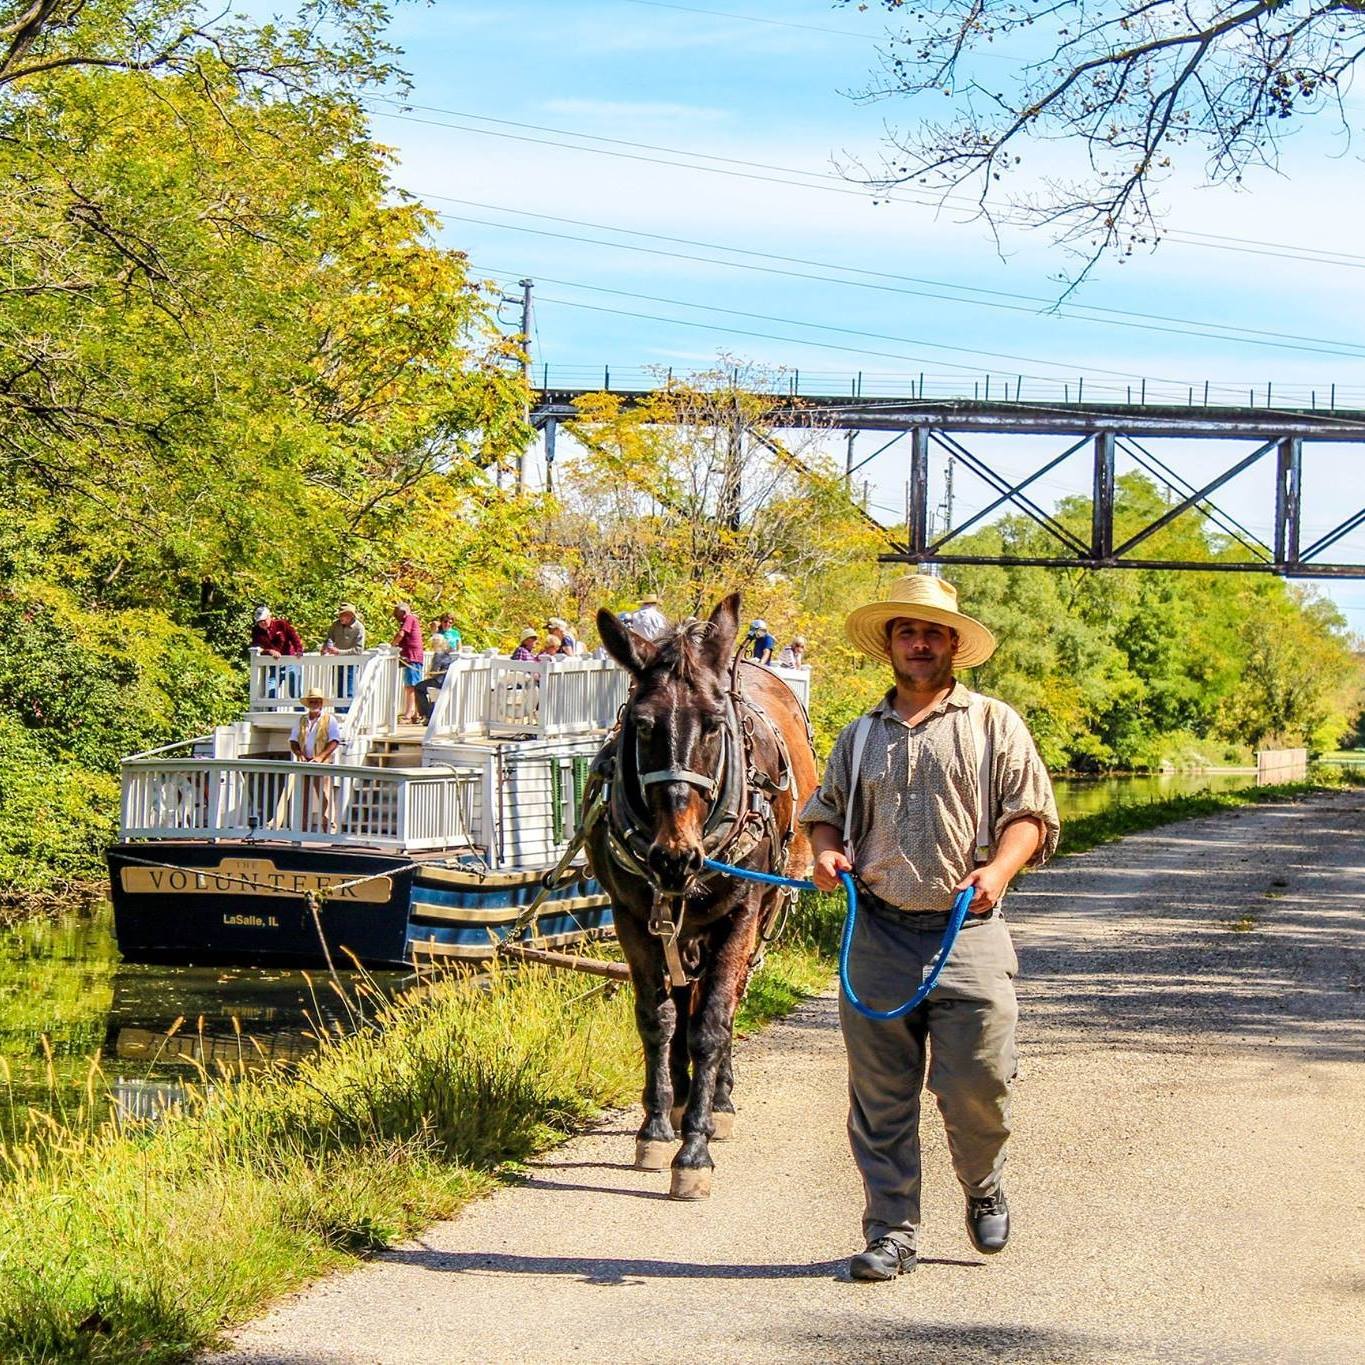 I&M Canal boat and a guy walking a mule long the river